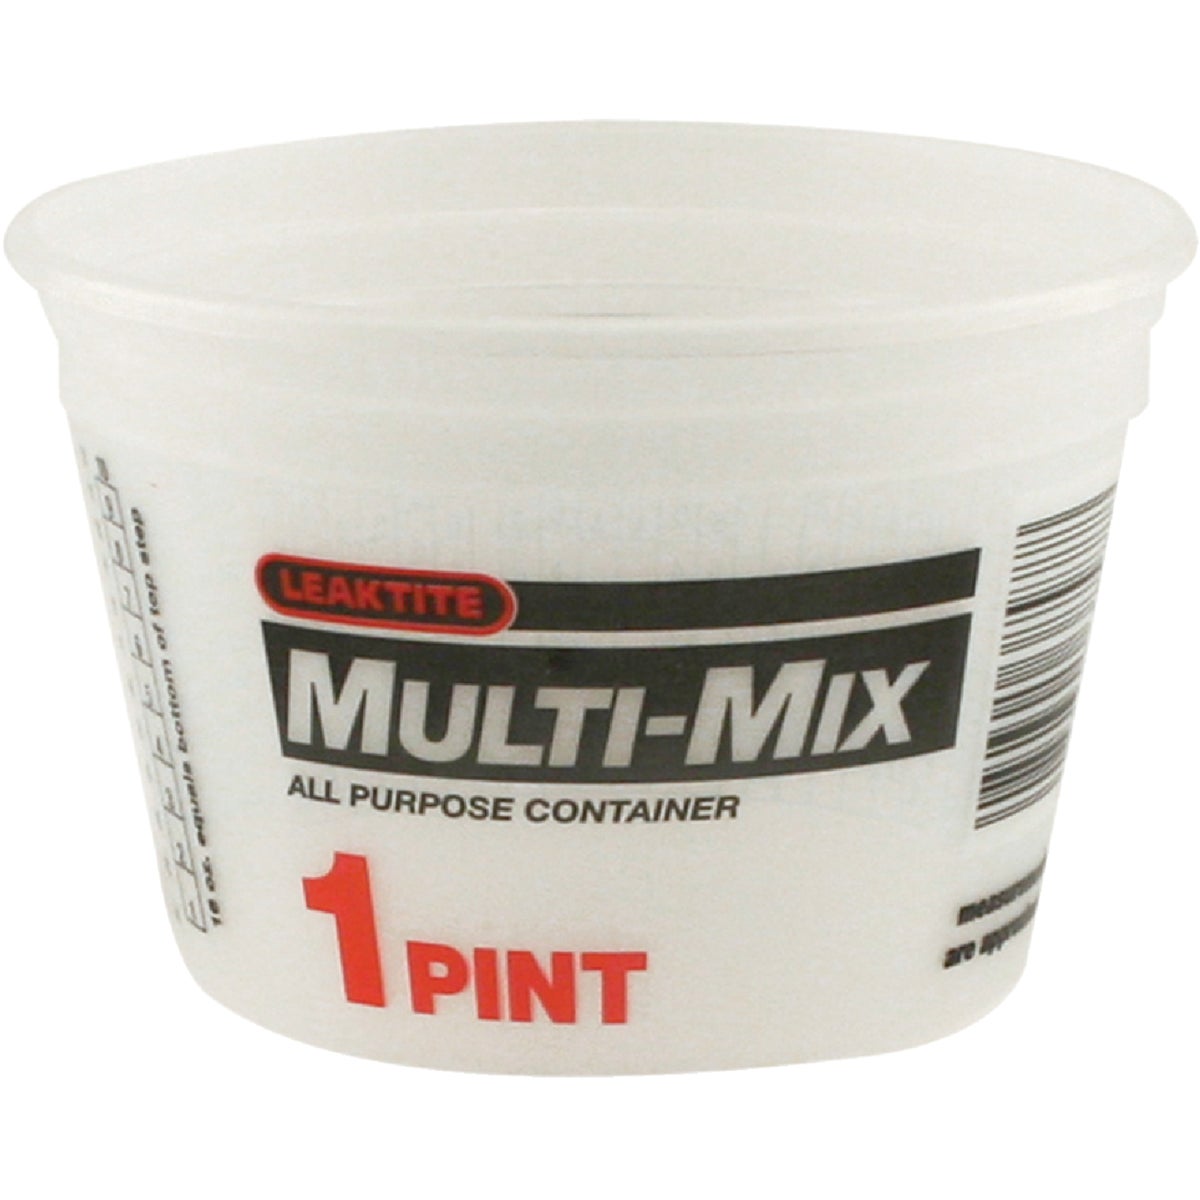 Leaktite 1 Pt. White Multi-Mix All Purpose Mixing And Storage Container